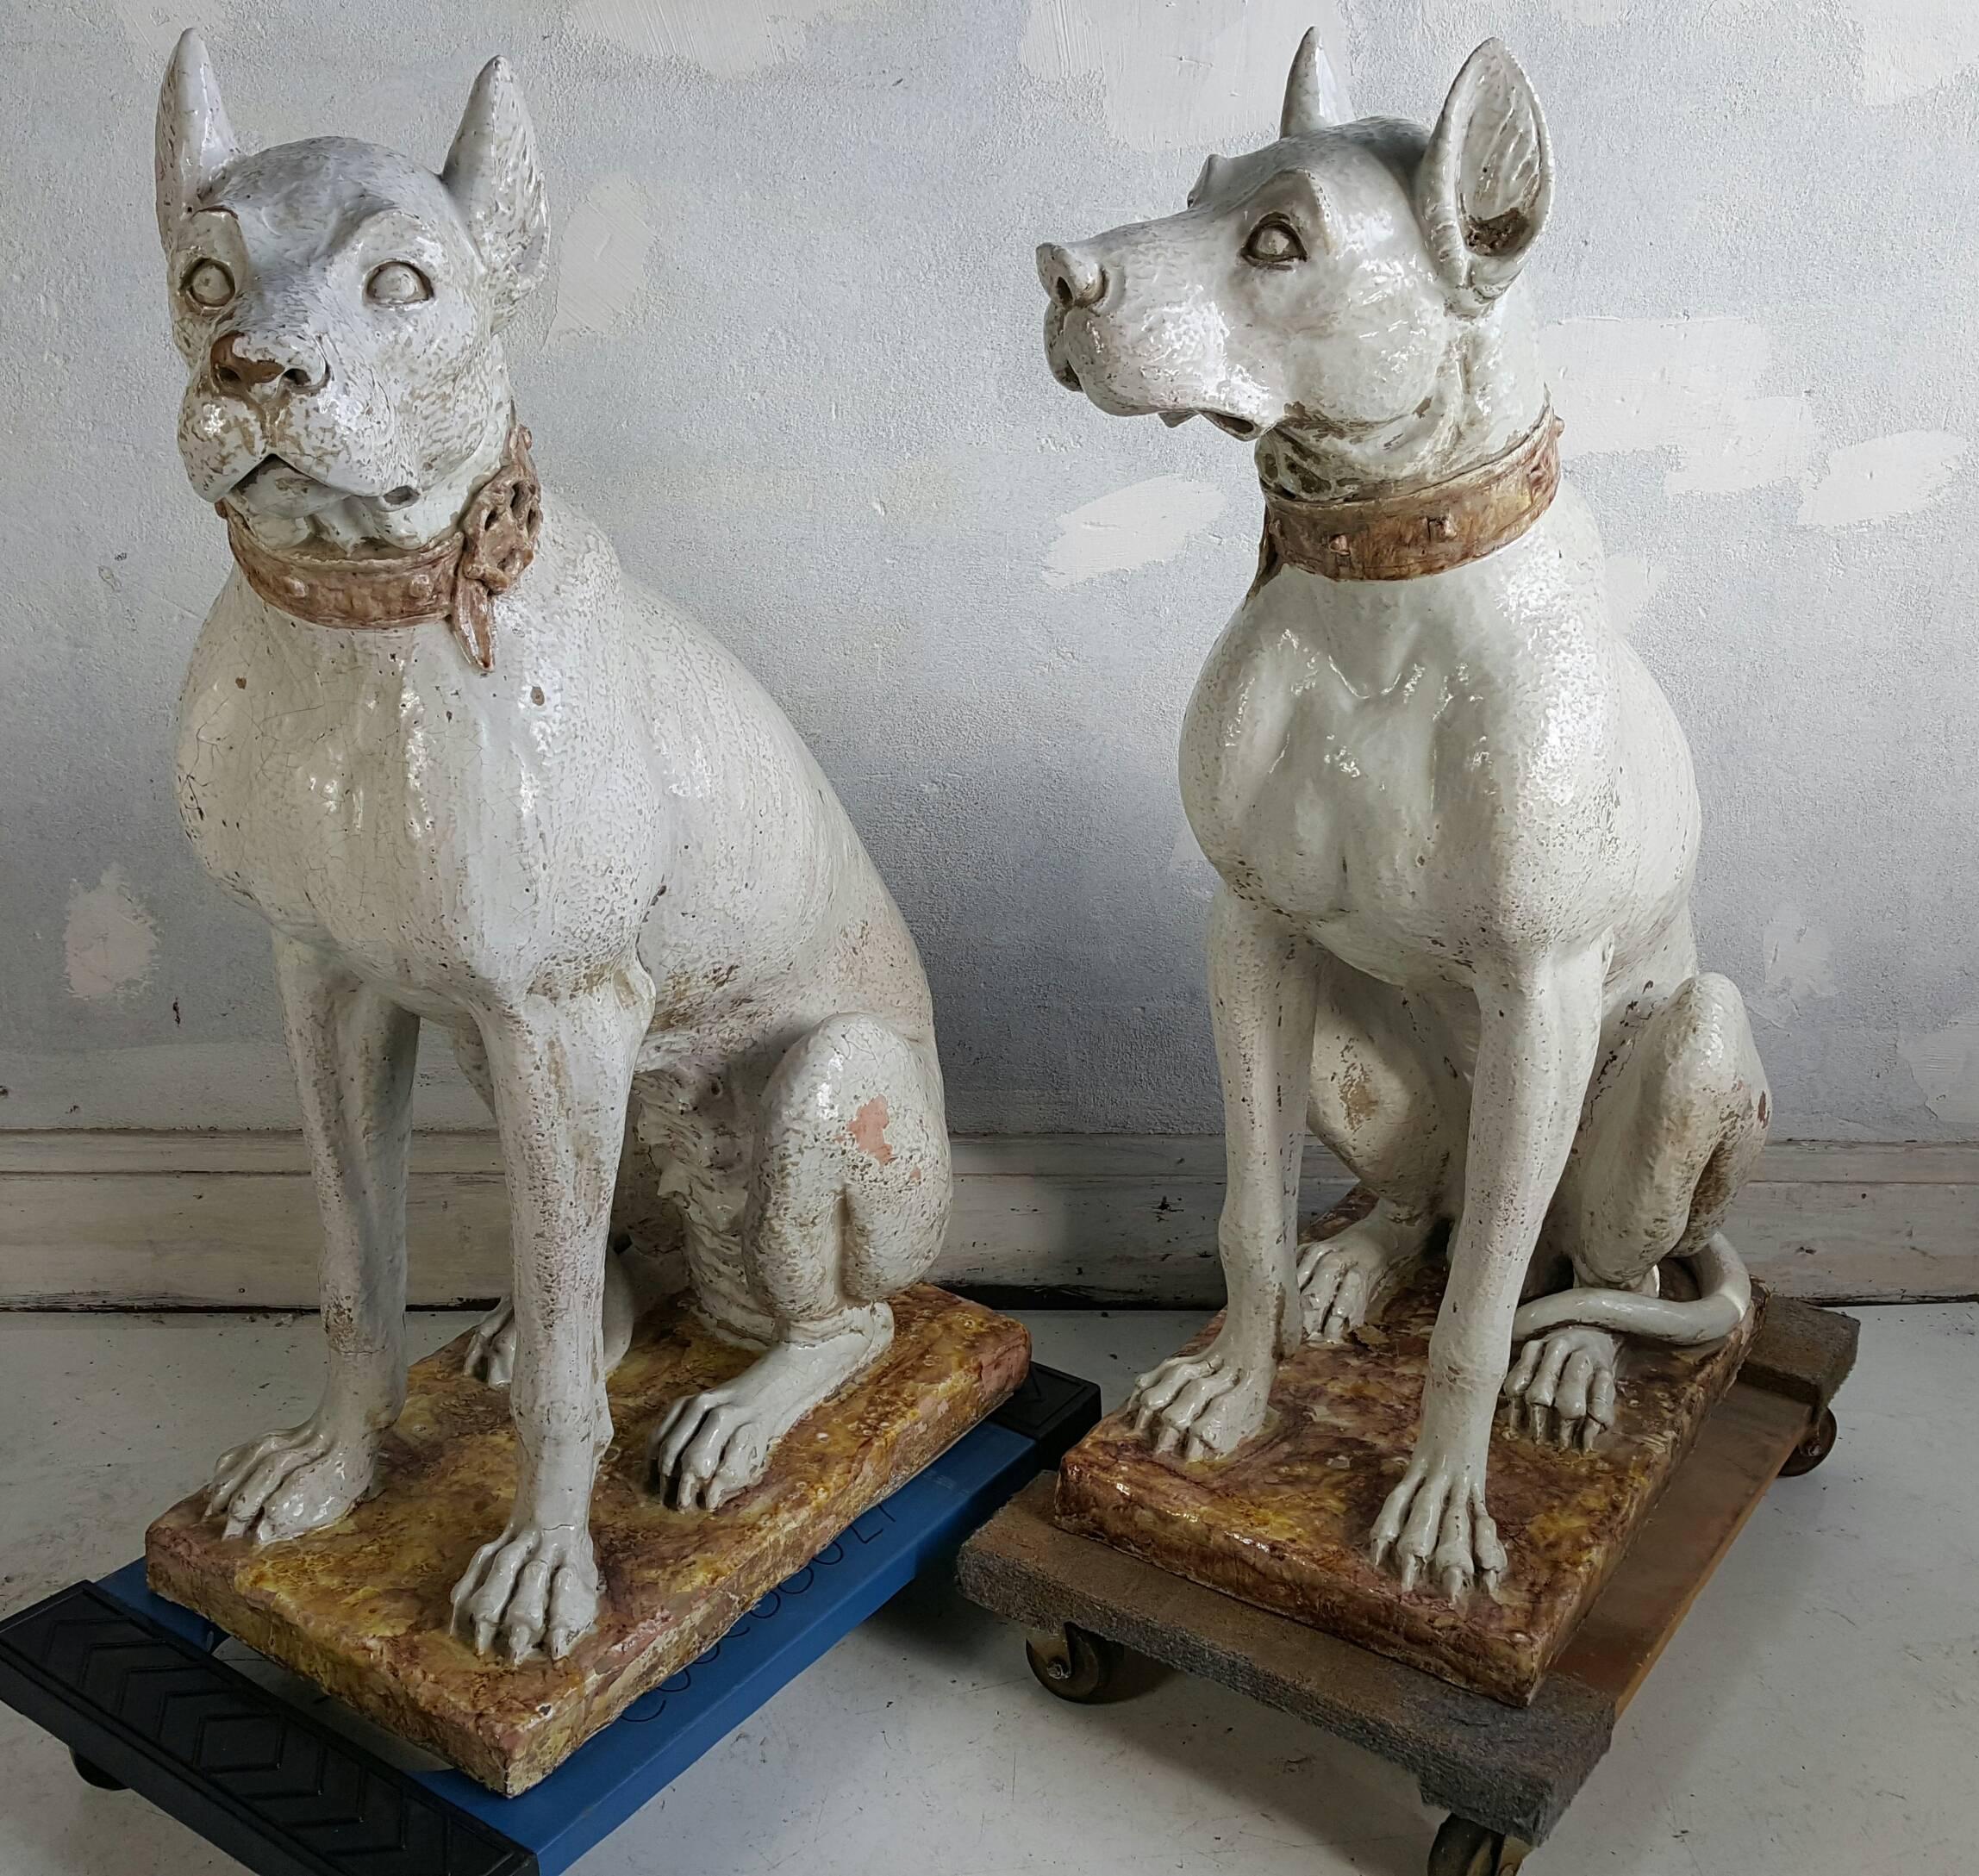 Hand-Painted Pair of Monumental 20th Century Glazed Terra Cotta Dog Sculptures, Italy